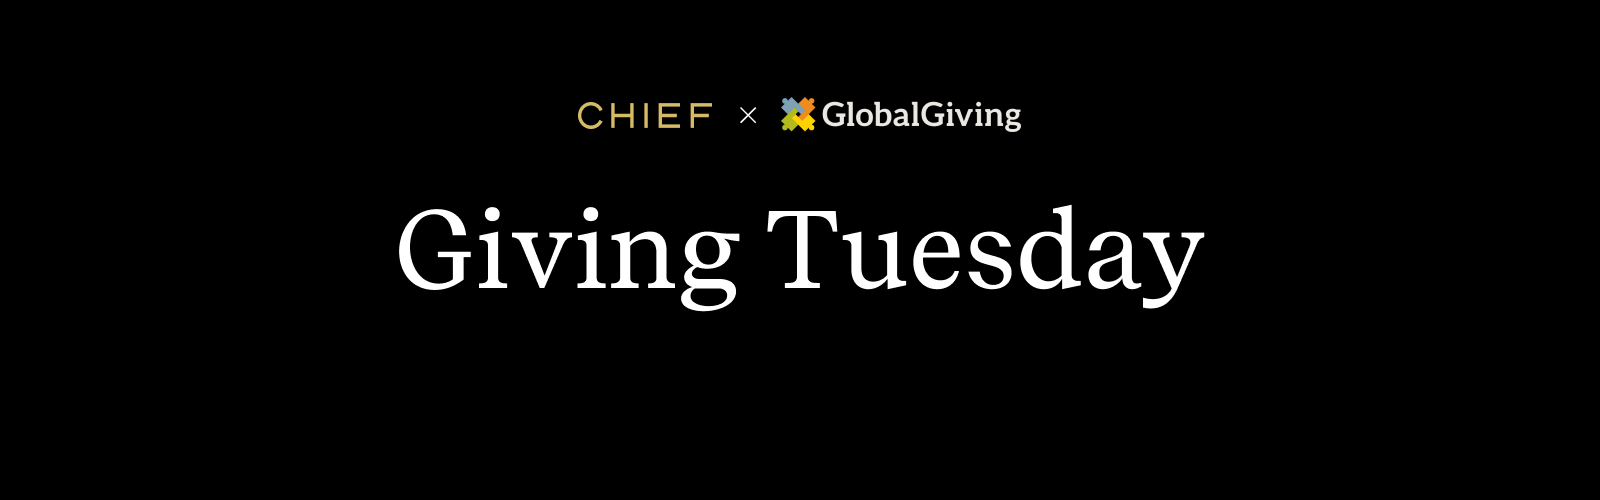 Chief x GlobalGiving | Giving Tuesday